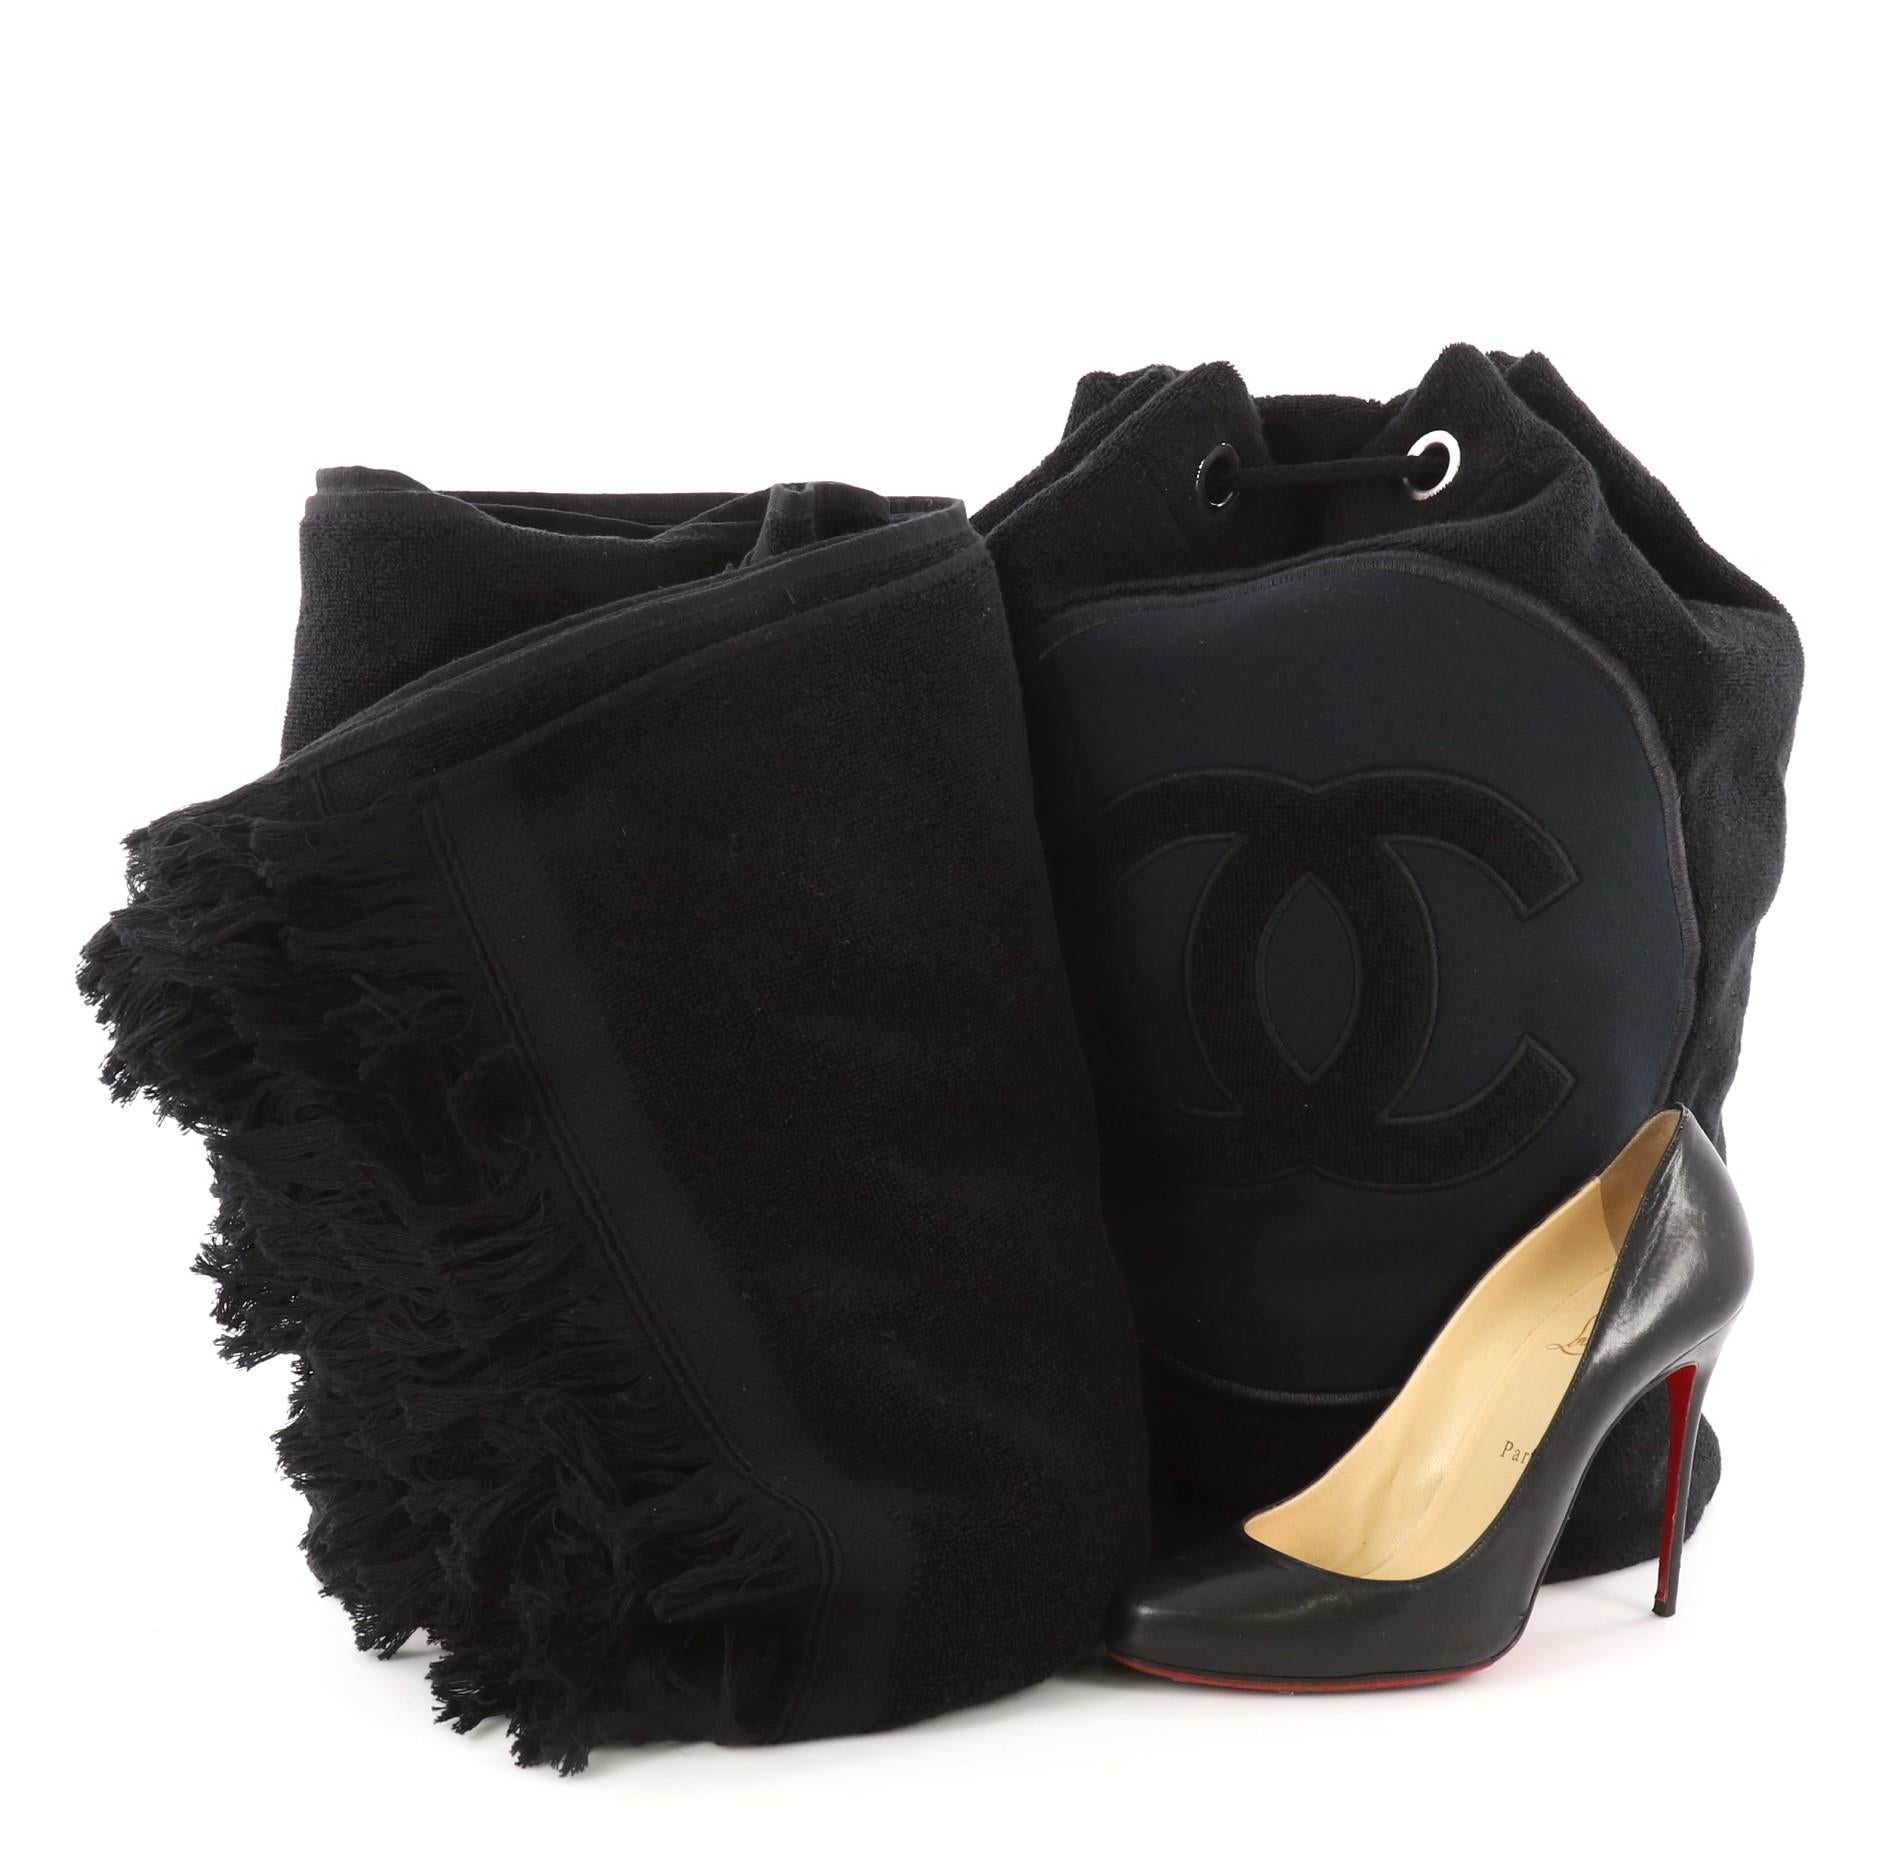 This Chanel CC Drawstring Beach Bag Terry Cloth Large, crafted in black terry cloth, features drawstring closure woven in grommets, shoulder strap and silver-tone hardware. It opens to a black fabric interior. **Note: Shoe photographed is used as a